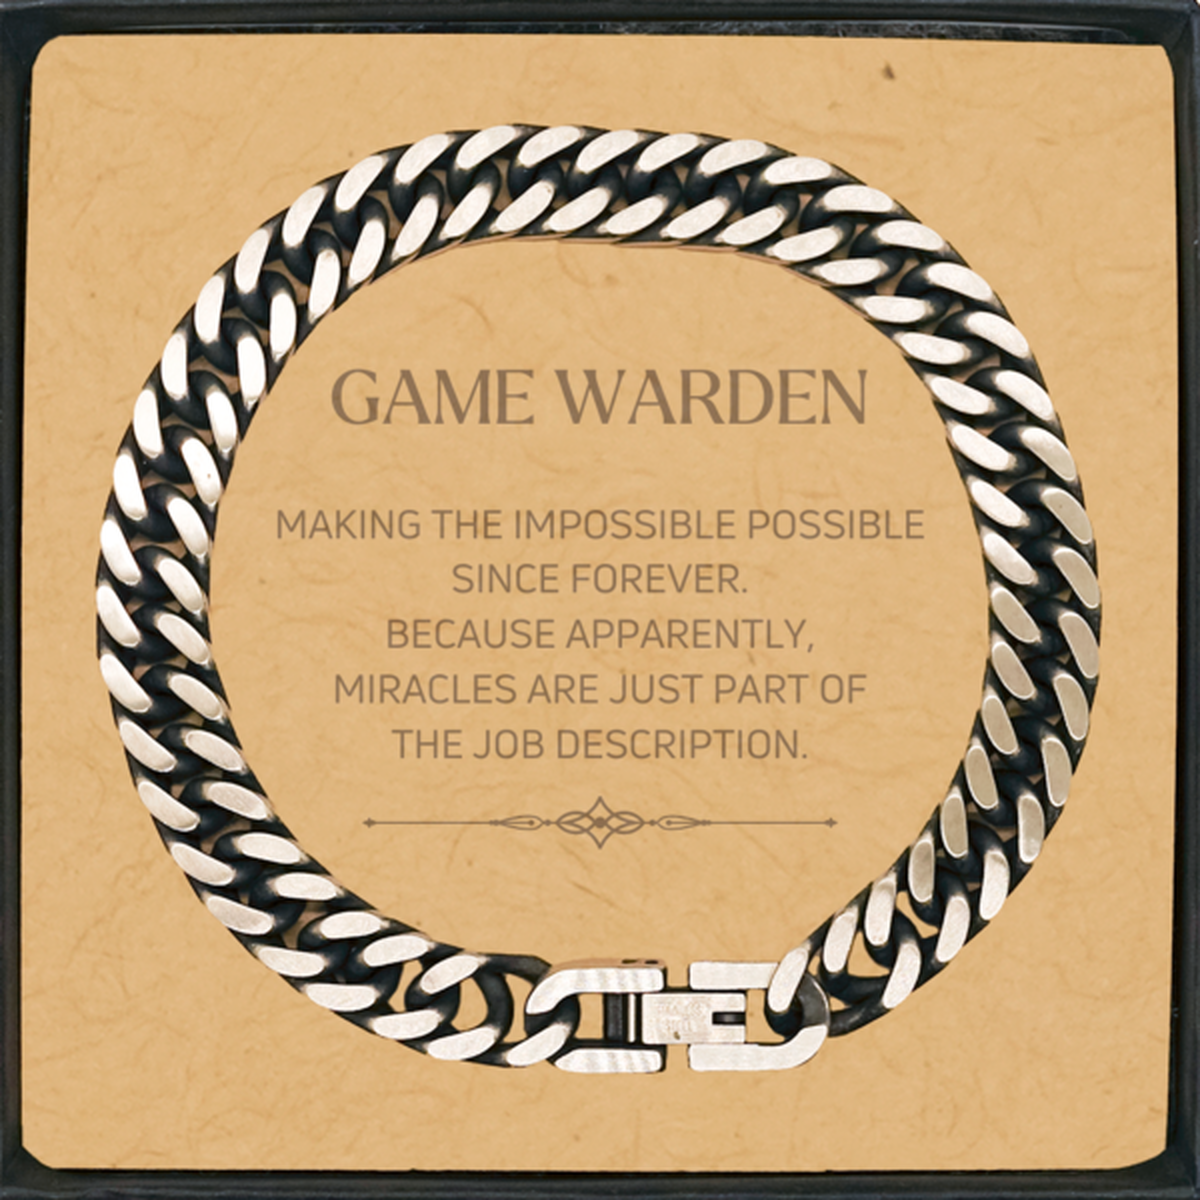 Funny Game Warden Gifts, Miracles are just part of the job description, Inspirational Birthday Cuban Link Chain Bracelet For Game Warden, Men, Women, Coworkers, Friends, Boss